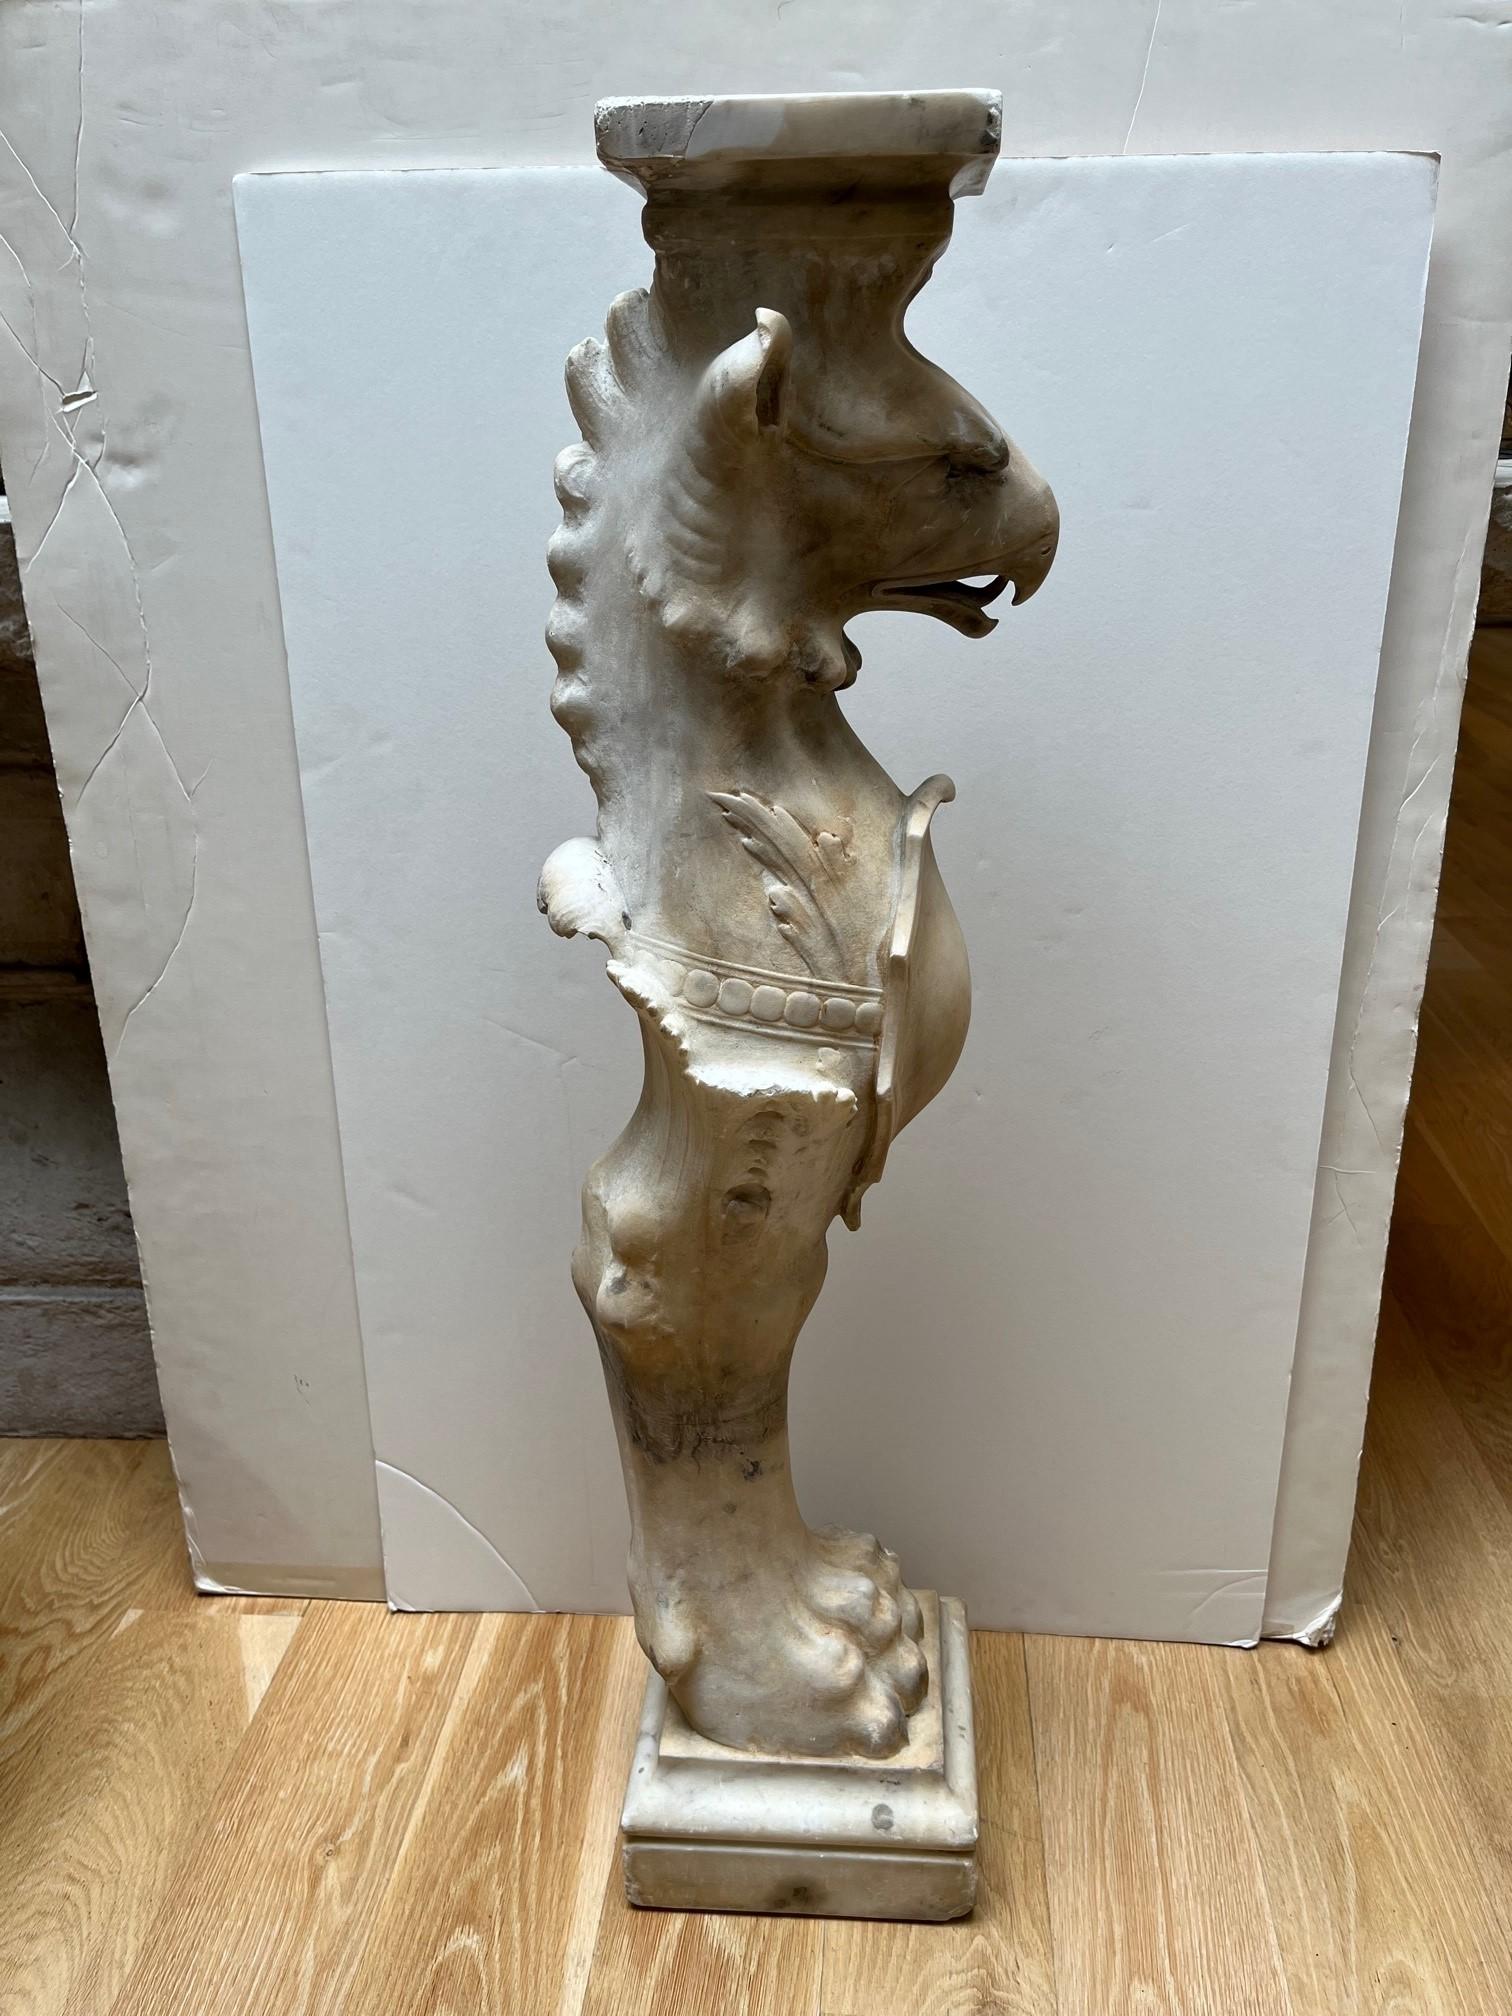 Pair of Antique Carved Marble Gargoyle Pedestal, Made from Solid Marble, in the Shape of Eagle Head and Claw Feet, these are great for a Console Table
Top: 5.5